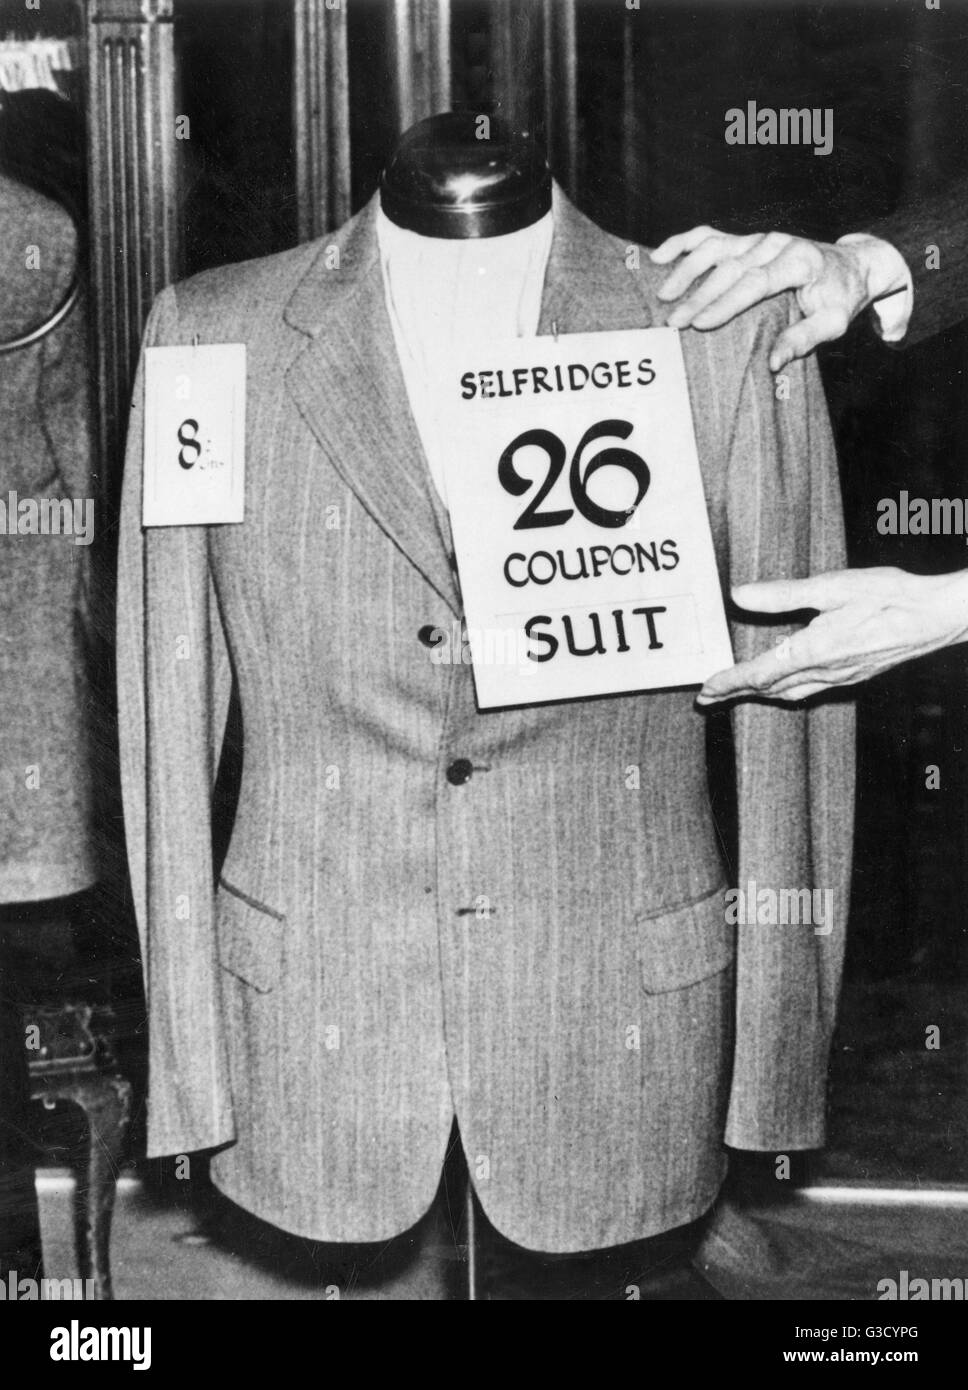 WW2 - Cost of a Selfridges 3-piece suit - Cost 8 guineas and 26 Clothing rationing coupons - 17th June, 1941. In 1942, each person had 60 coupons p.a., which reduced down to 24 coupons by 1945.     Date: 1941 Stock Photo